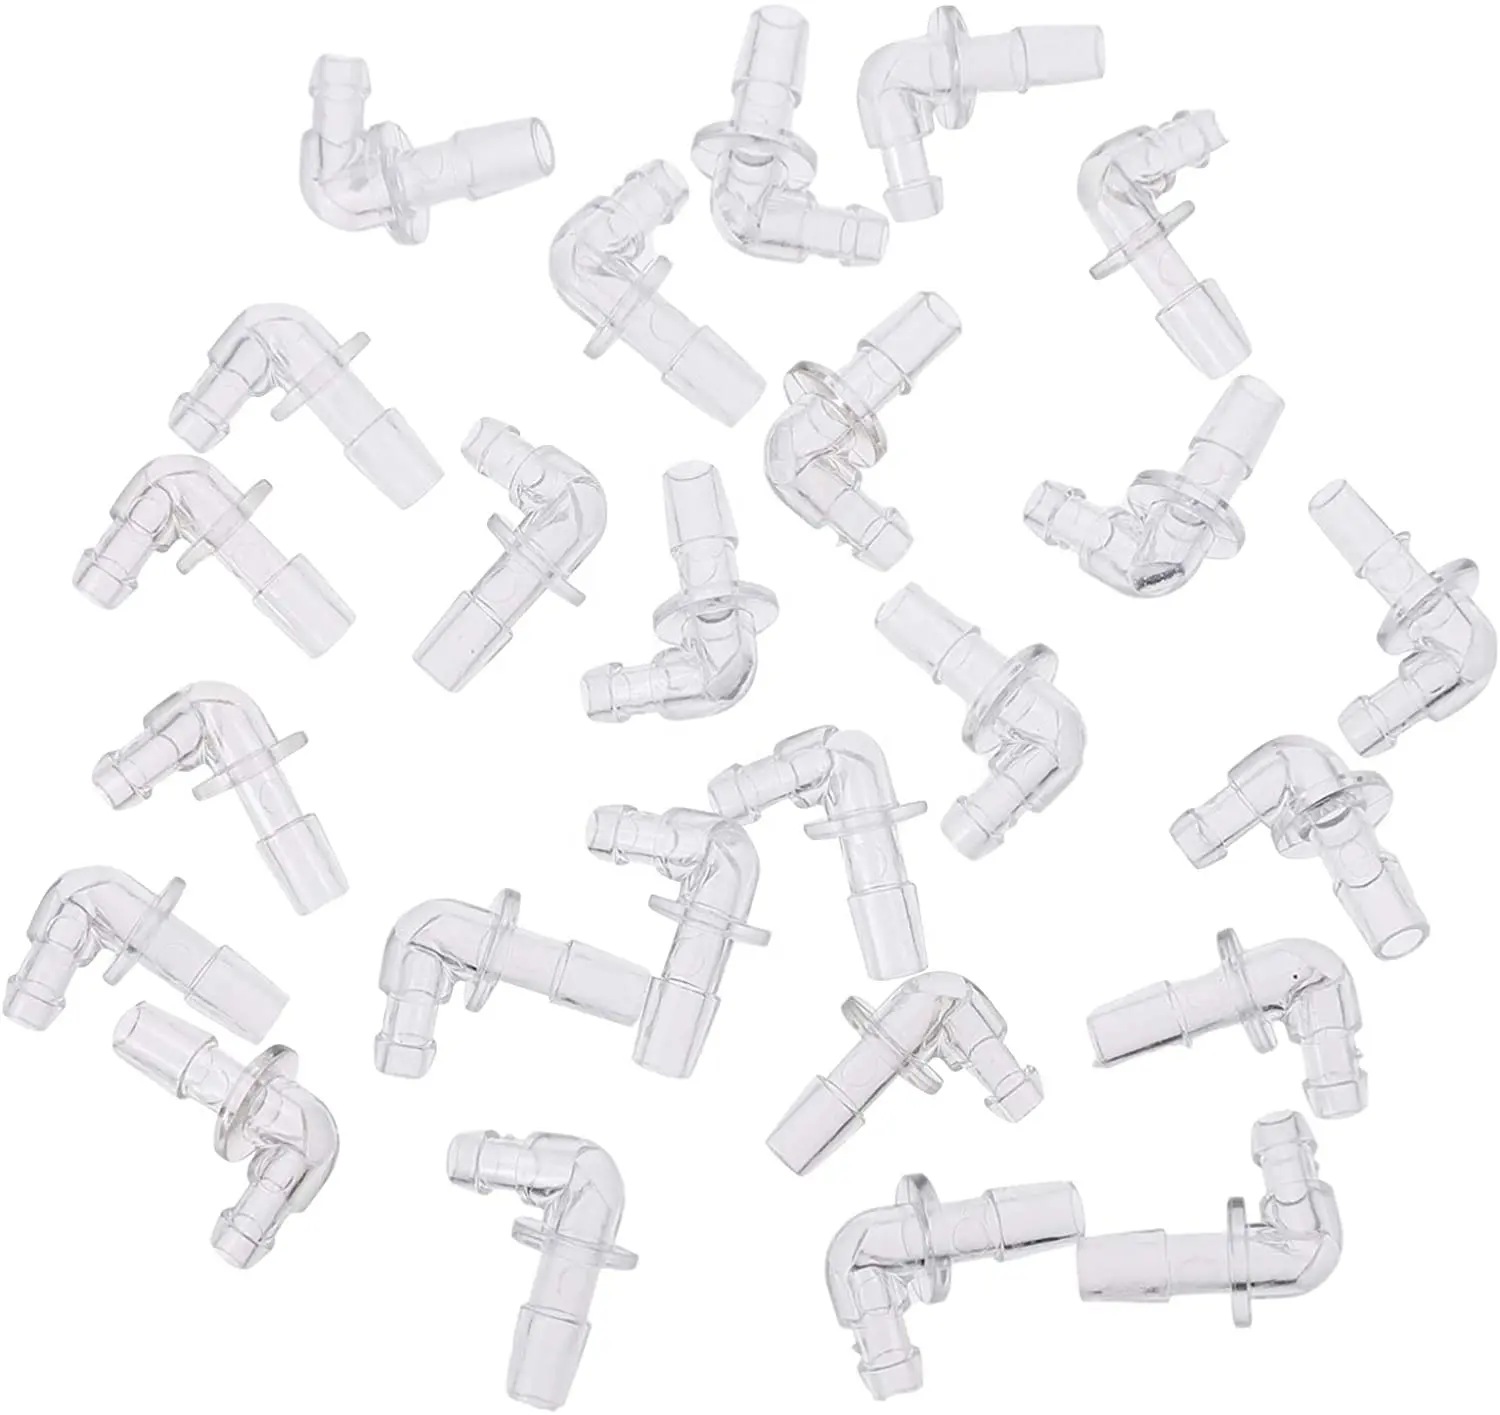 Hearing Aids Tube Connectors Acoustic Tube Earpiece Earmold Audio Earbud Ears Molds Parts Replacements